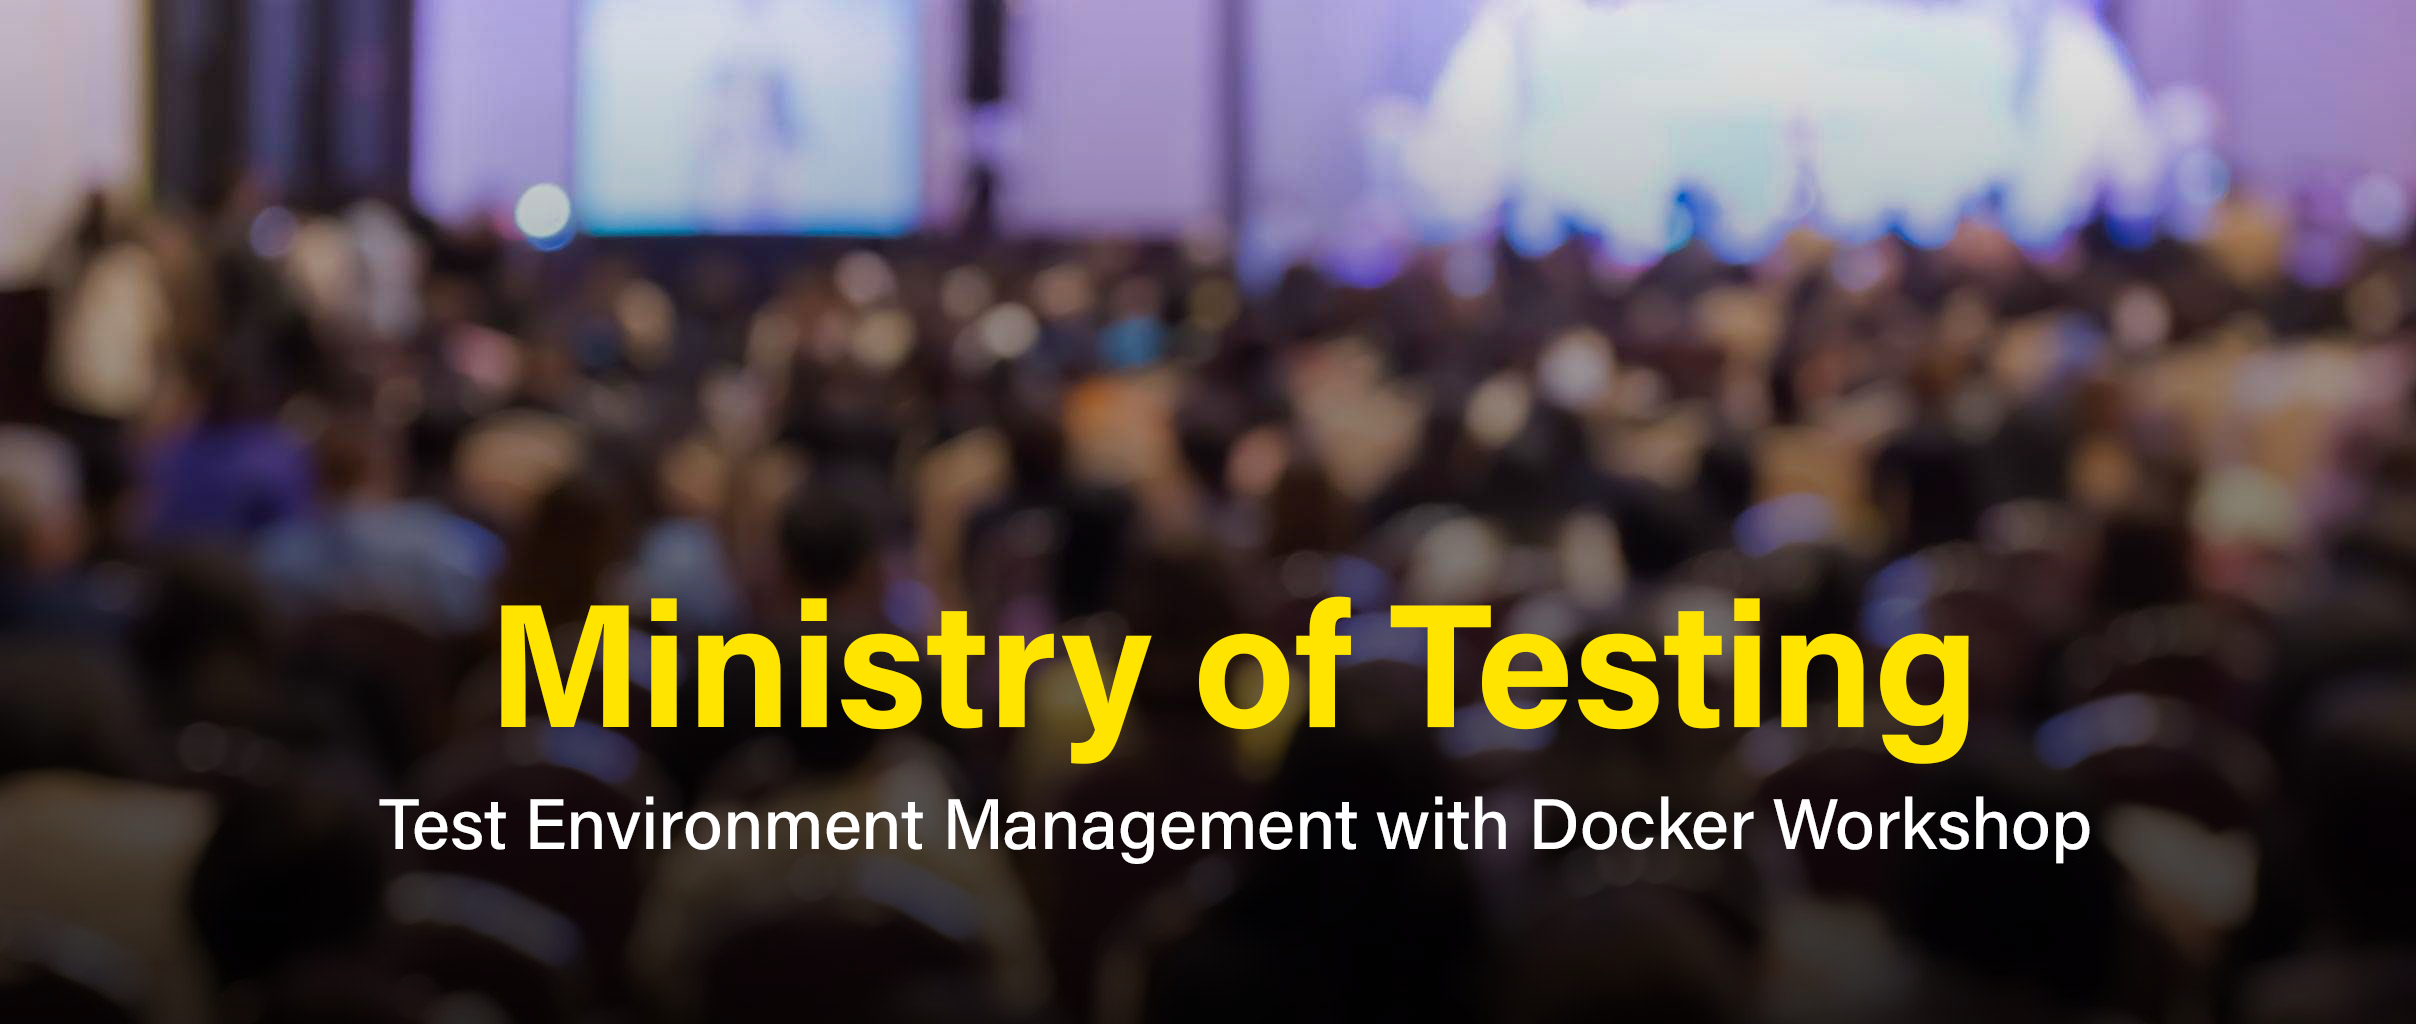 Masterclass: Test Environments Management with Docker